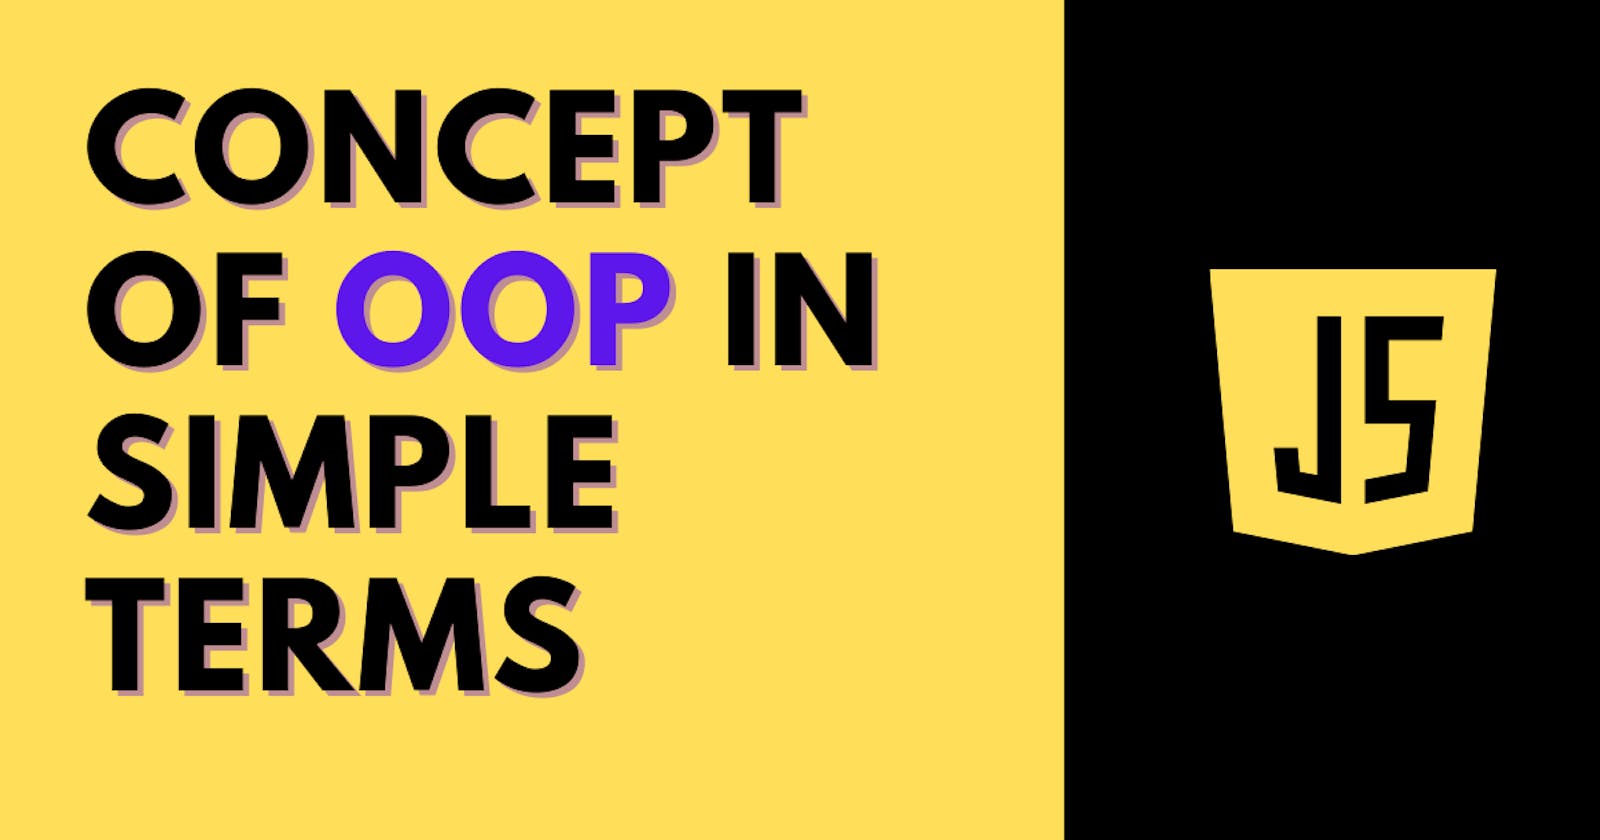 Explain me OOP's concept in simple terms